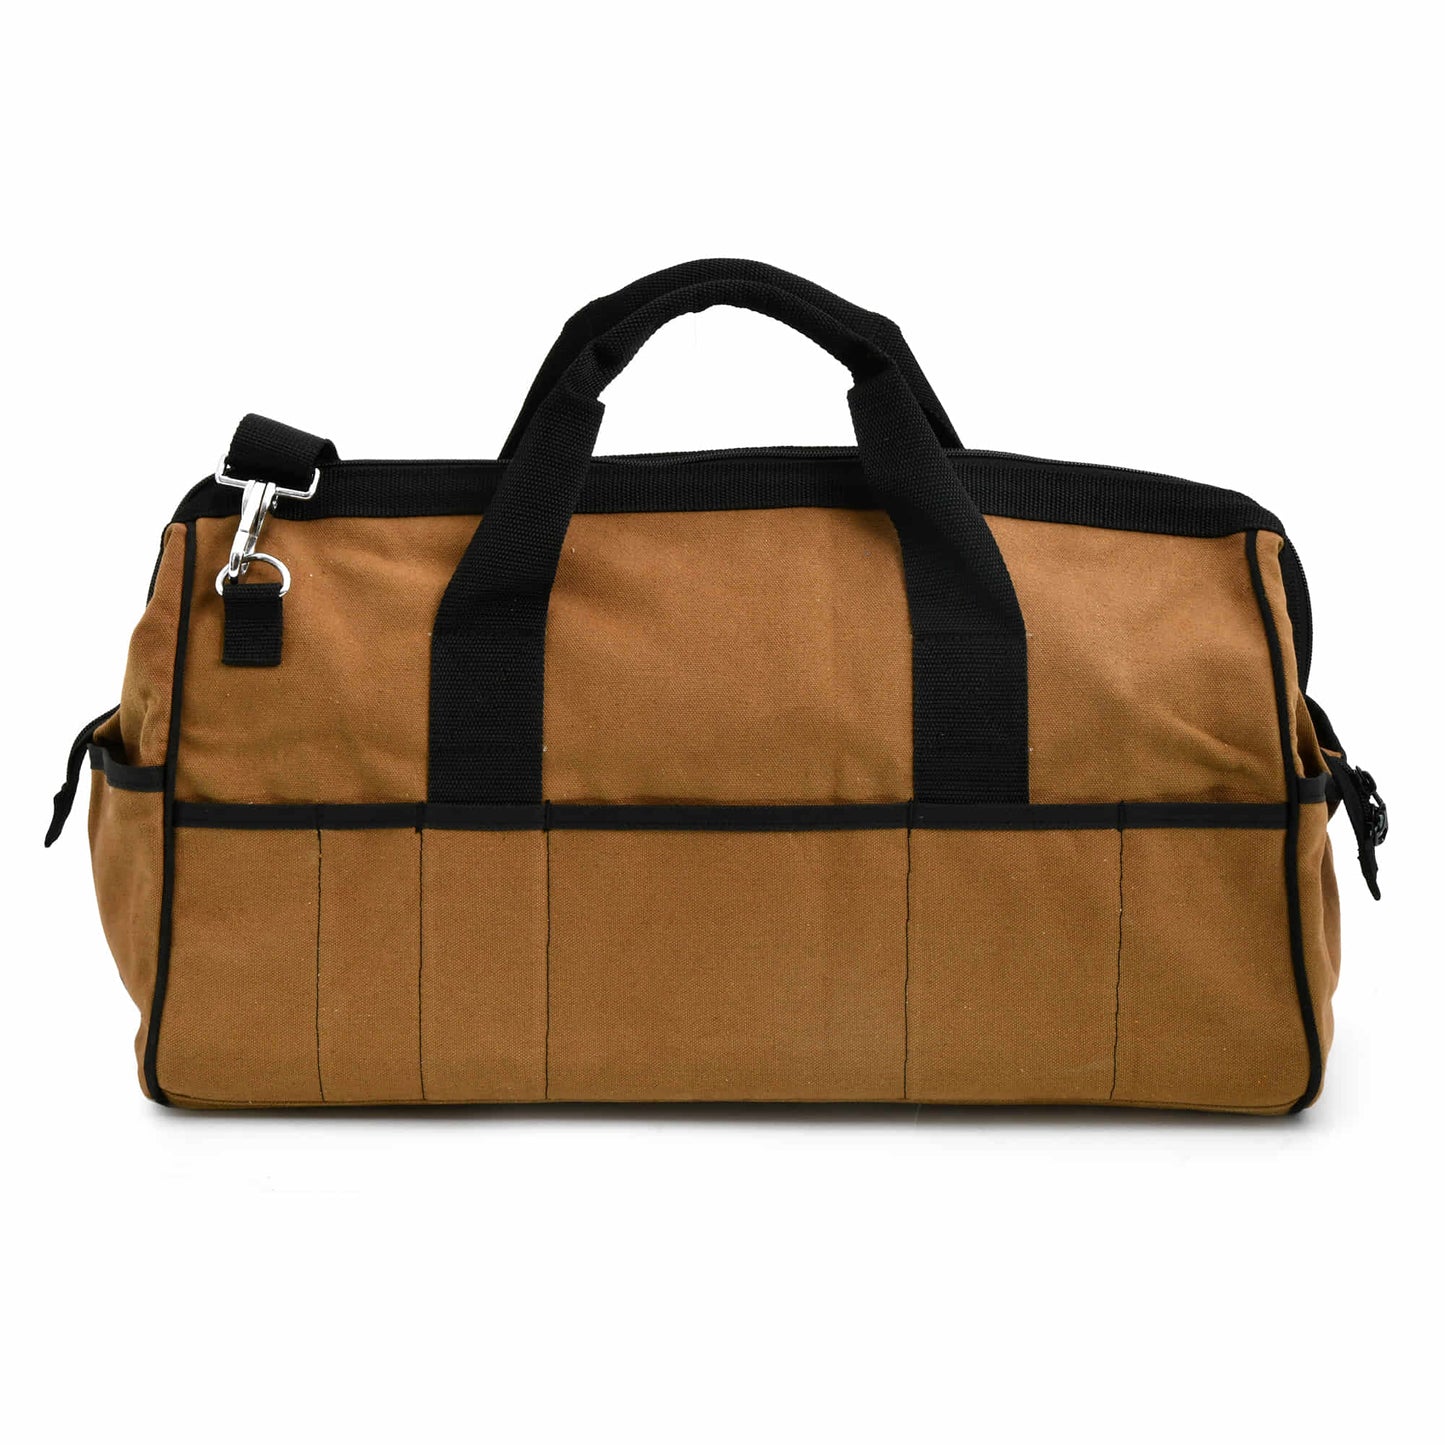 Style n Craft 97012 - 25 Pocket 20 Inch Wide Mouth Tool Bag in Brown Waterproof Canvas with Black Binding - Back View Showing the External Pockets 